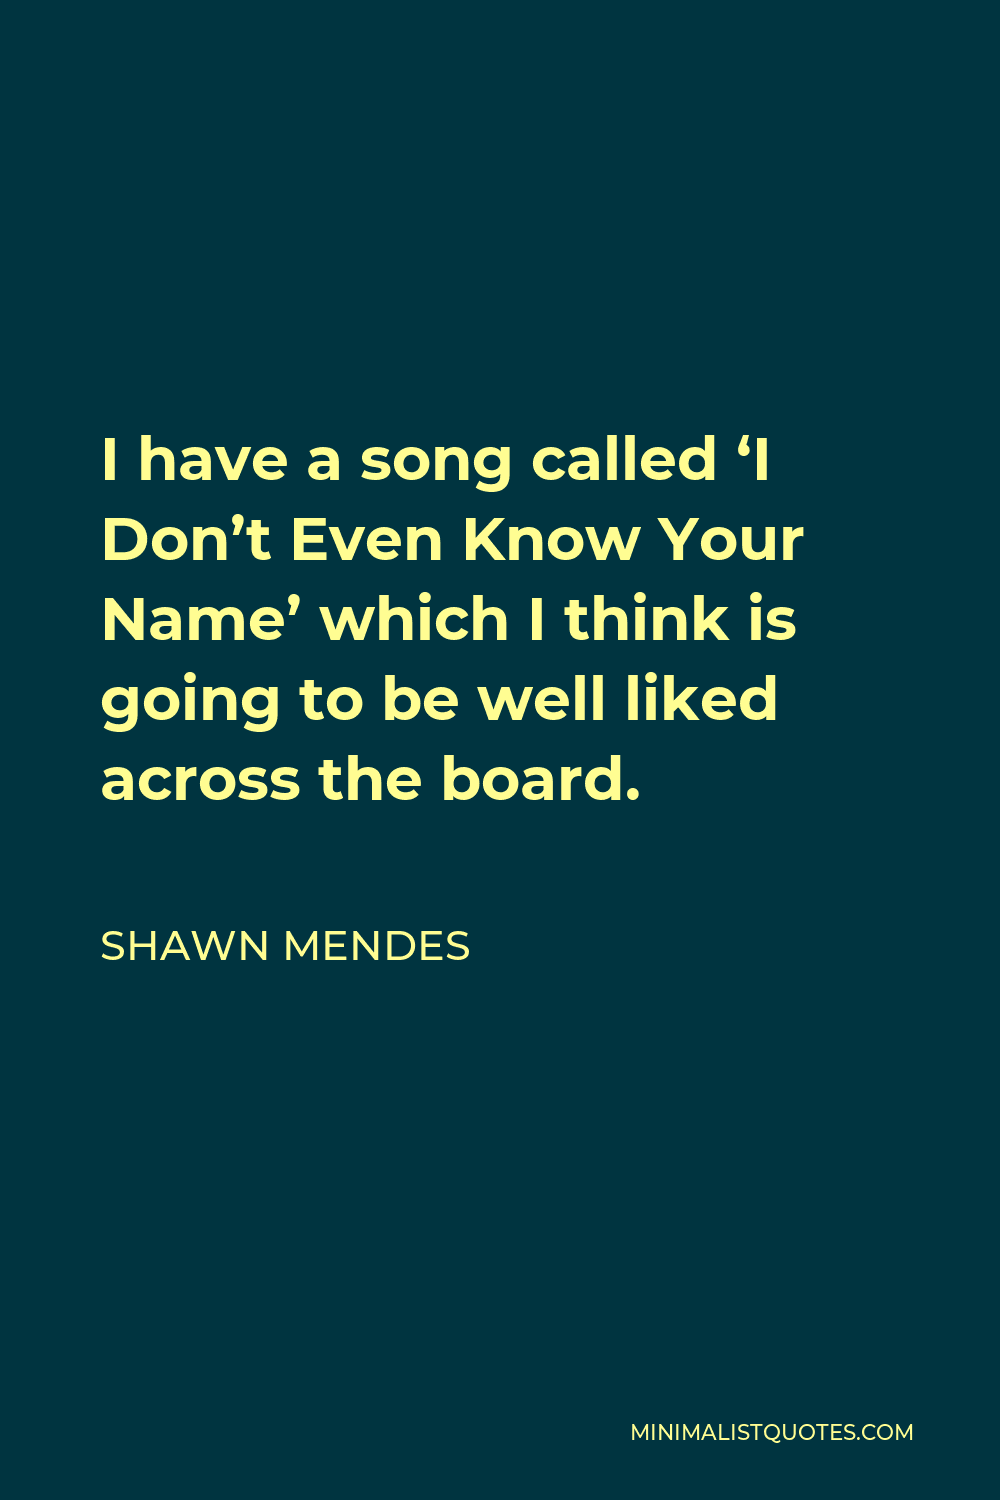 Shawn Mendes Quote - I have a song called ‘I Don’t Even Know Your Name’ which I think is going to be well liked across the board.